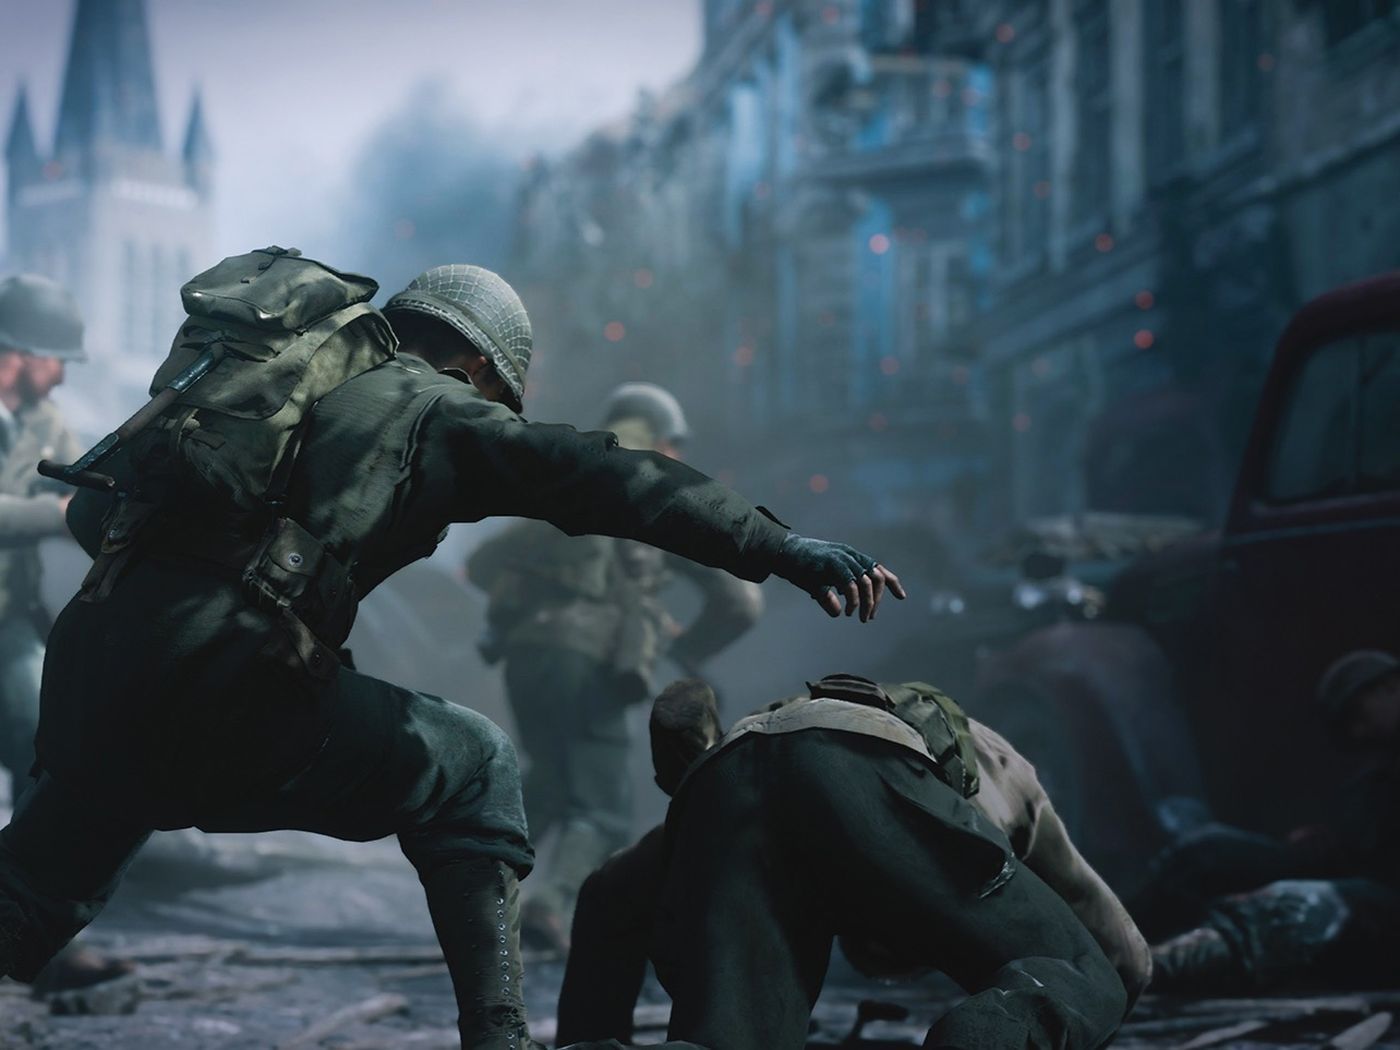 Call of Duty: WWII will highlight the vulnerability of its heroes